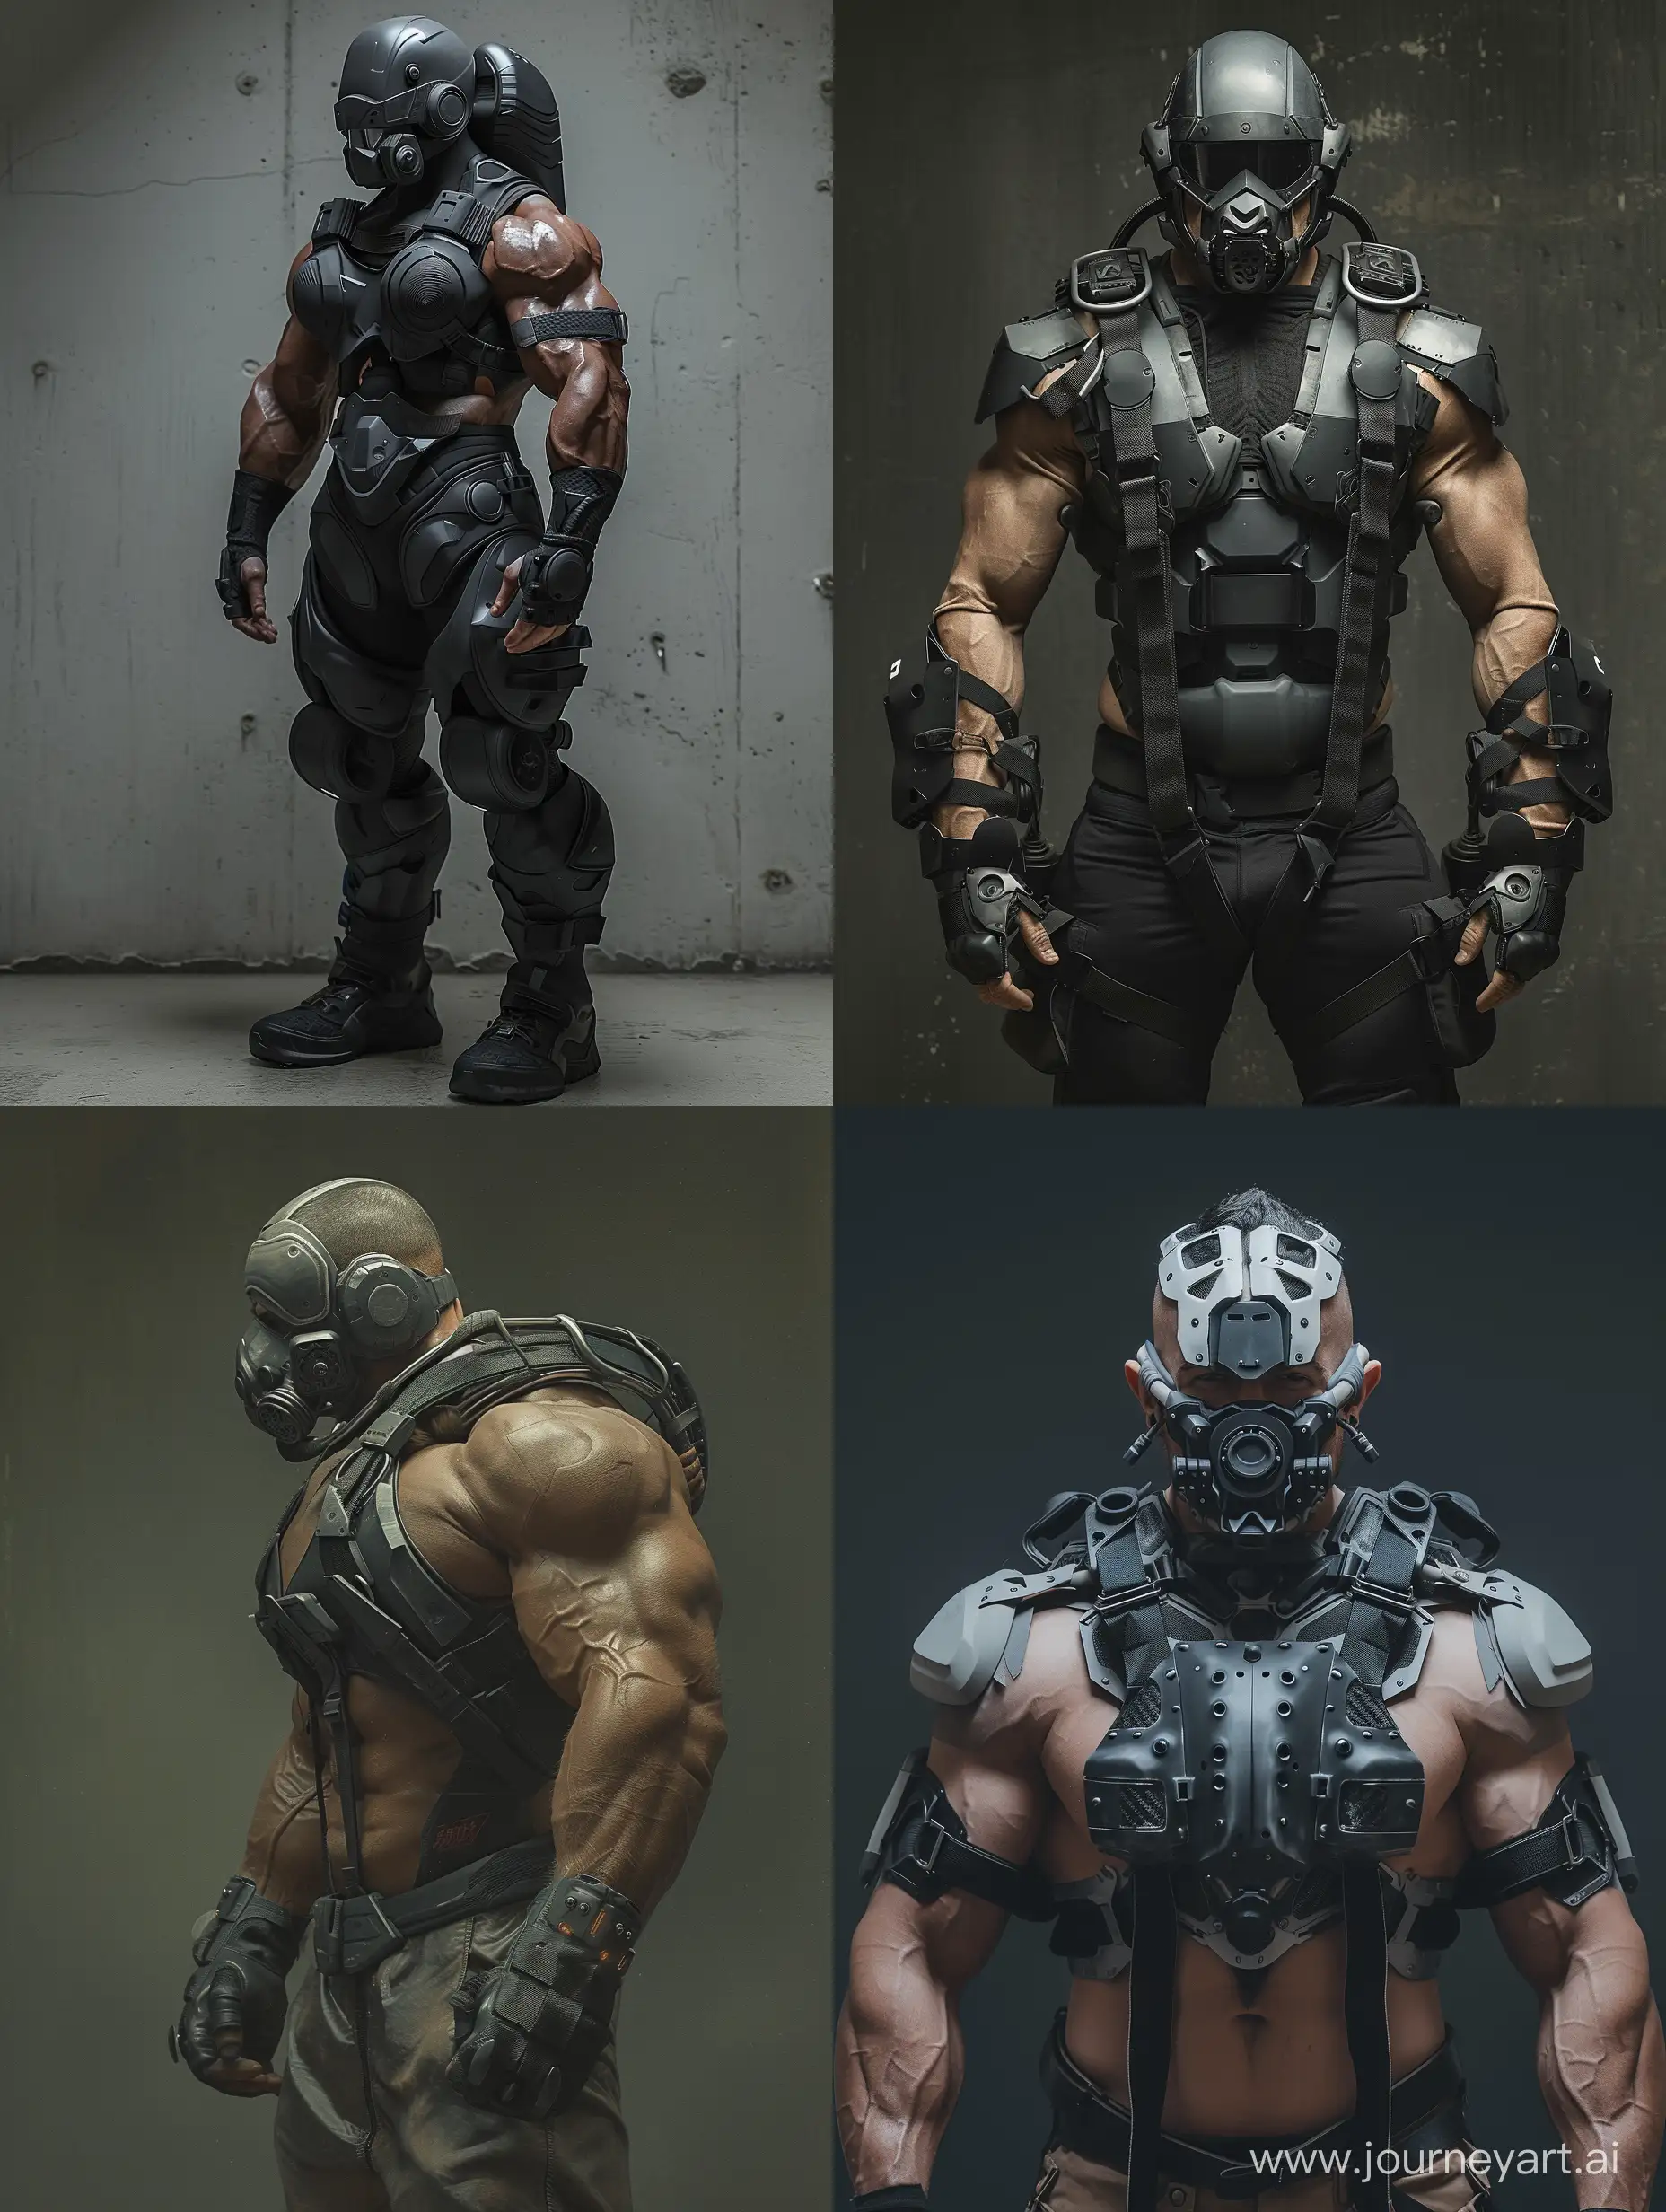 Futuristic-Cyborg-Weightlifter-in-Black-and-Gray-Power-Armor